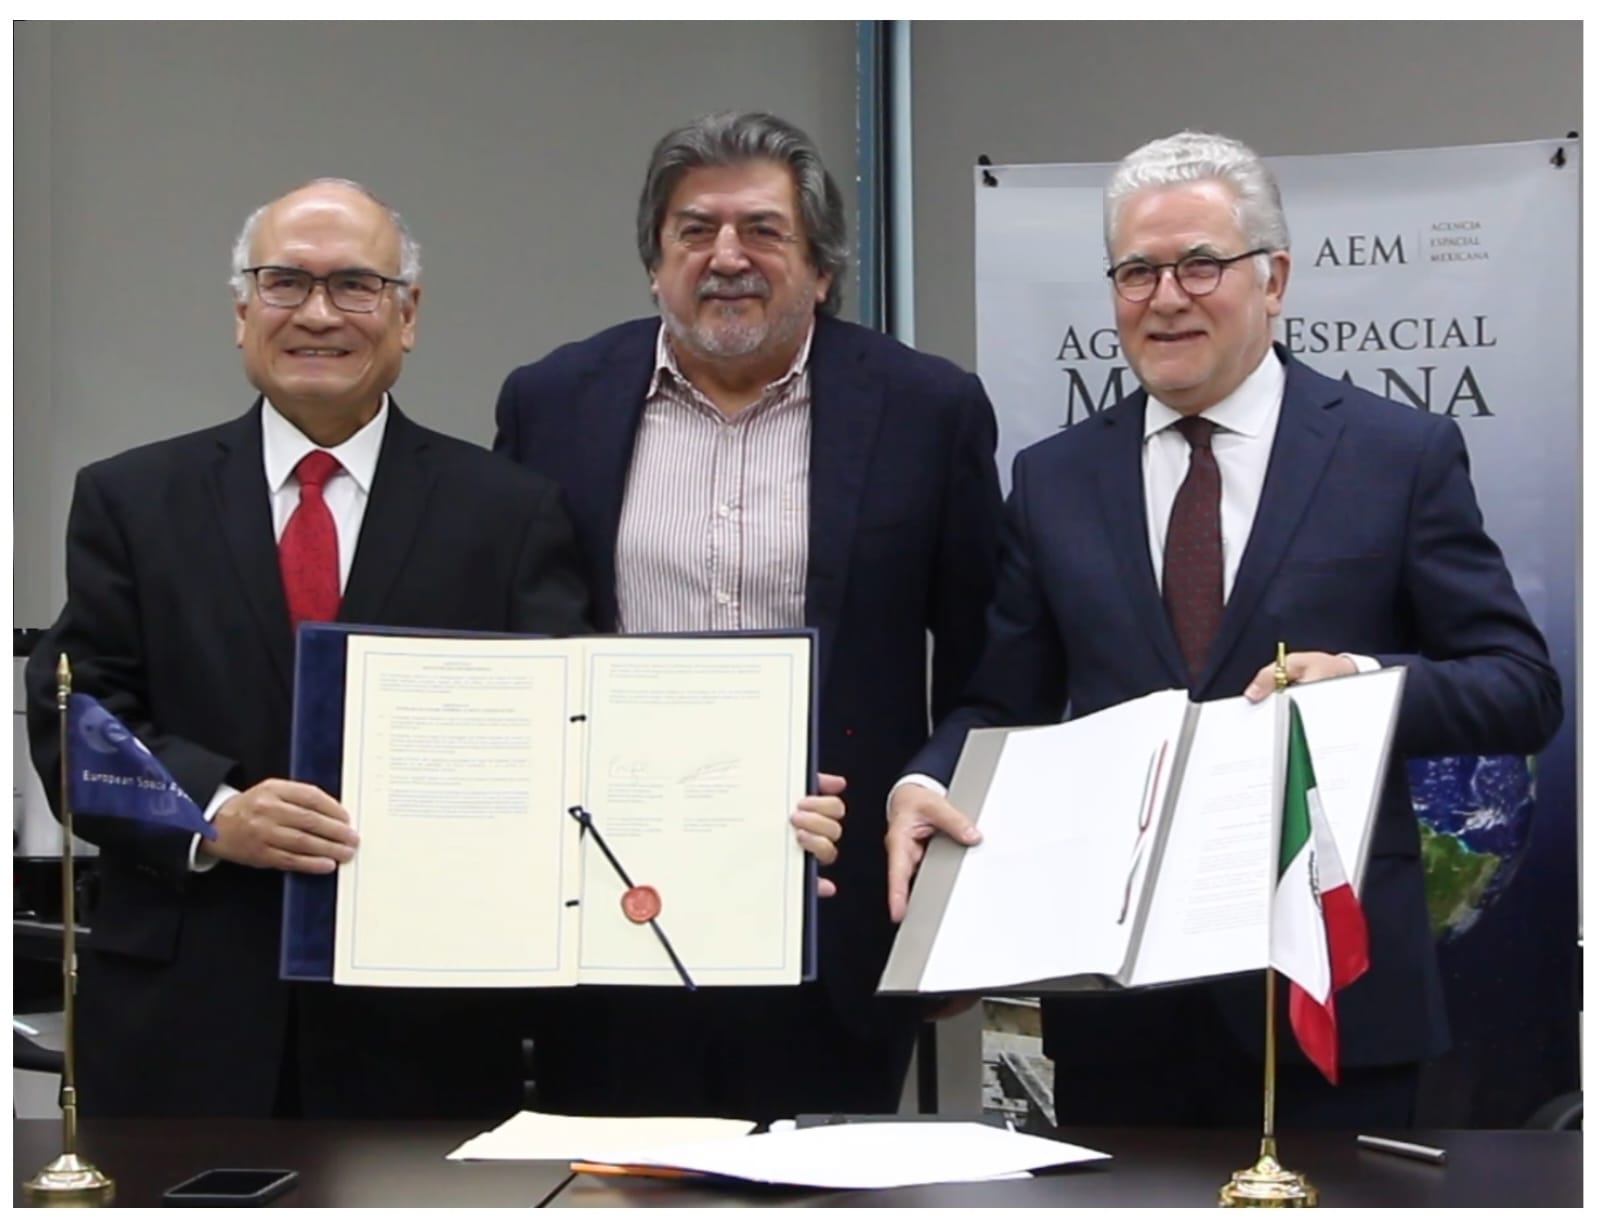 Mexico and Europe space agencies sign agreement